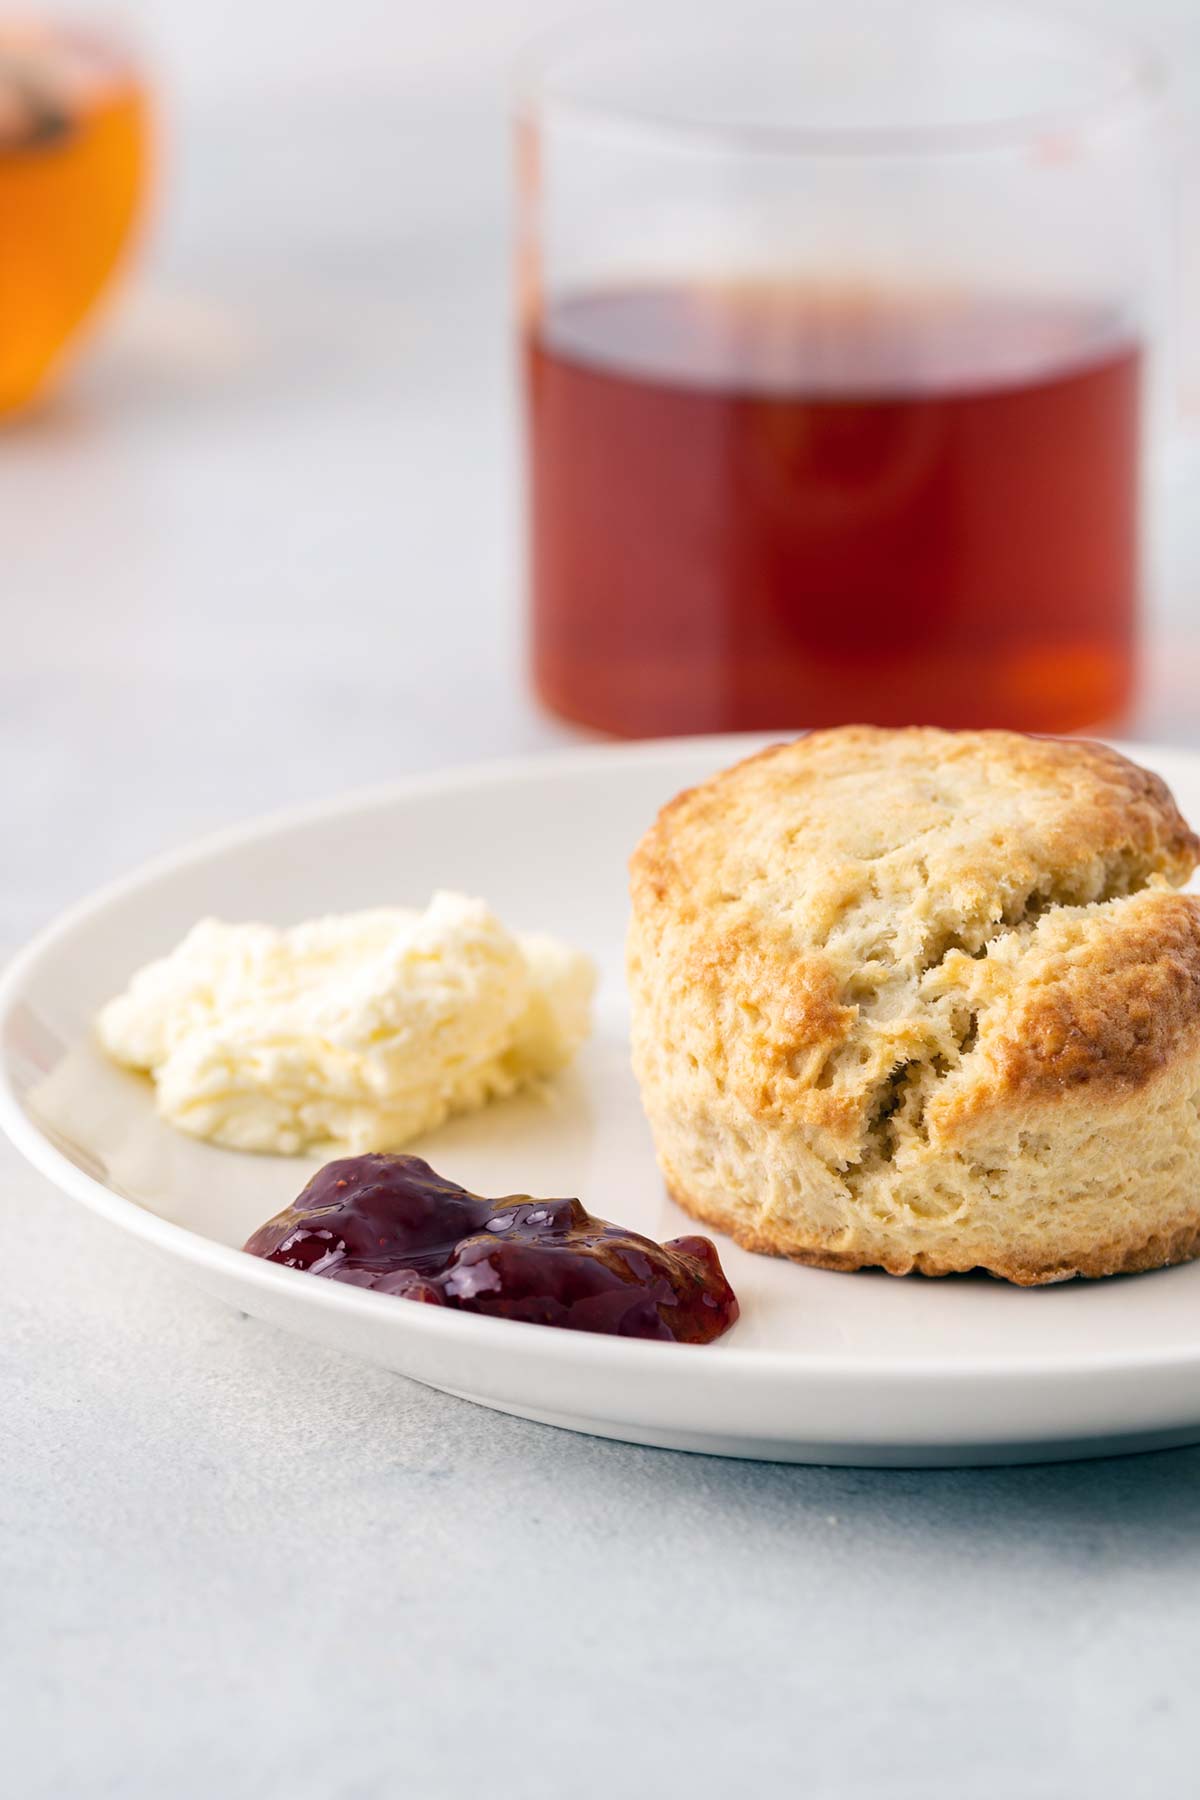 Scone on plate with clotted cream and jam.